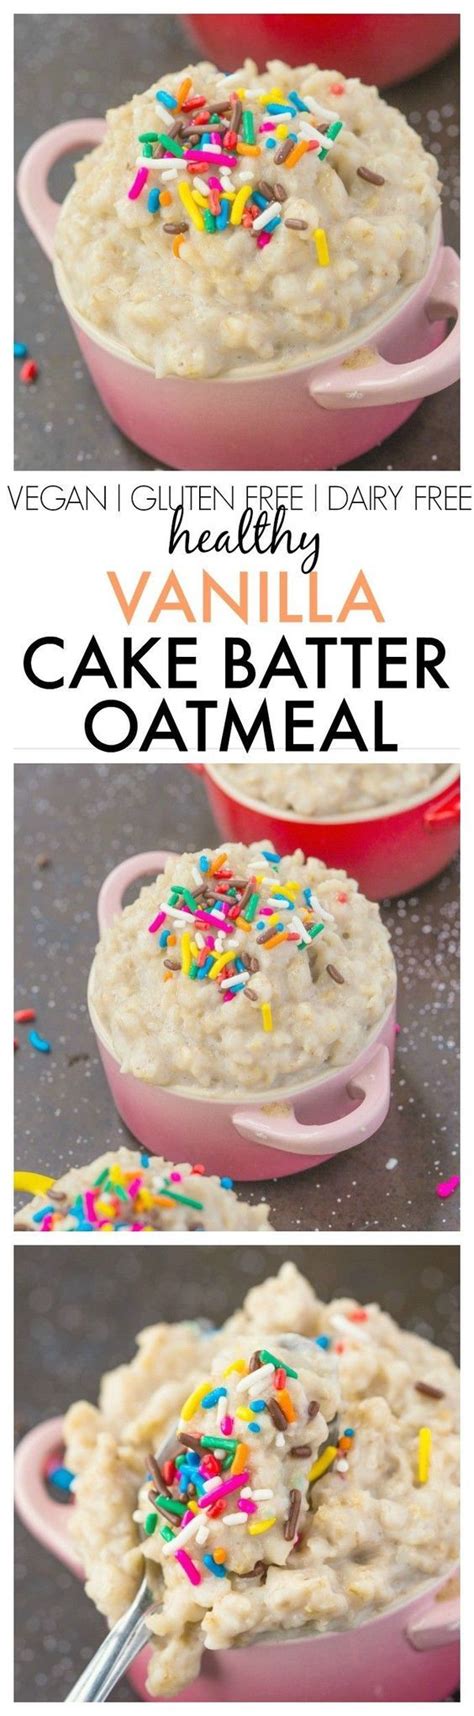 Eatingwell.com) getting real exotic with our flavors on this one. Healthy Vanilla Cake Batter Oatmeal- Enjoy overnight ...